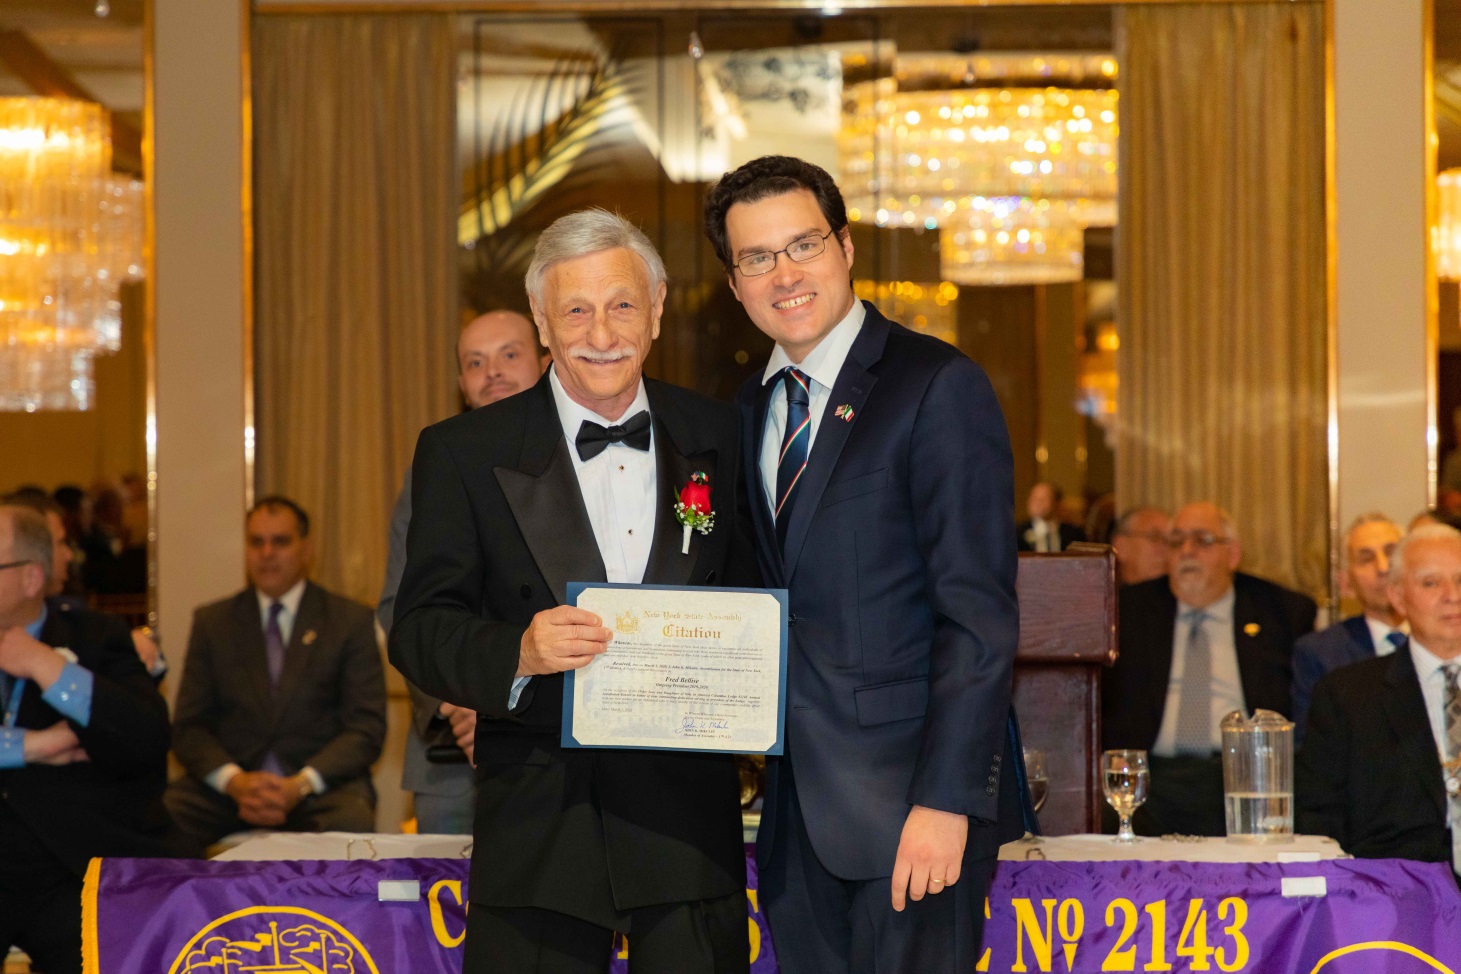 Assemblyman John Mikulin (R,C,I-Bethpage) presents Fred Bellise, outgoing president of the Sons of Italy Columbus Lodge 2143, with a citation at their installation ceremony on Sunday, March 1 at the Royal Palm Catering Hall in Farmingdale.